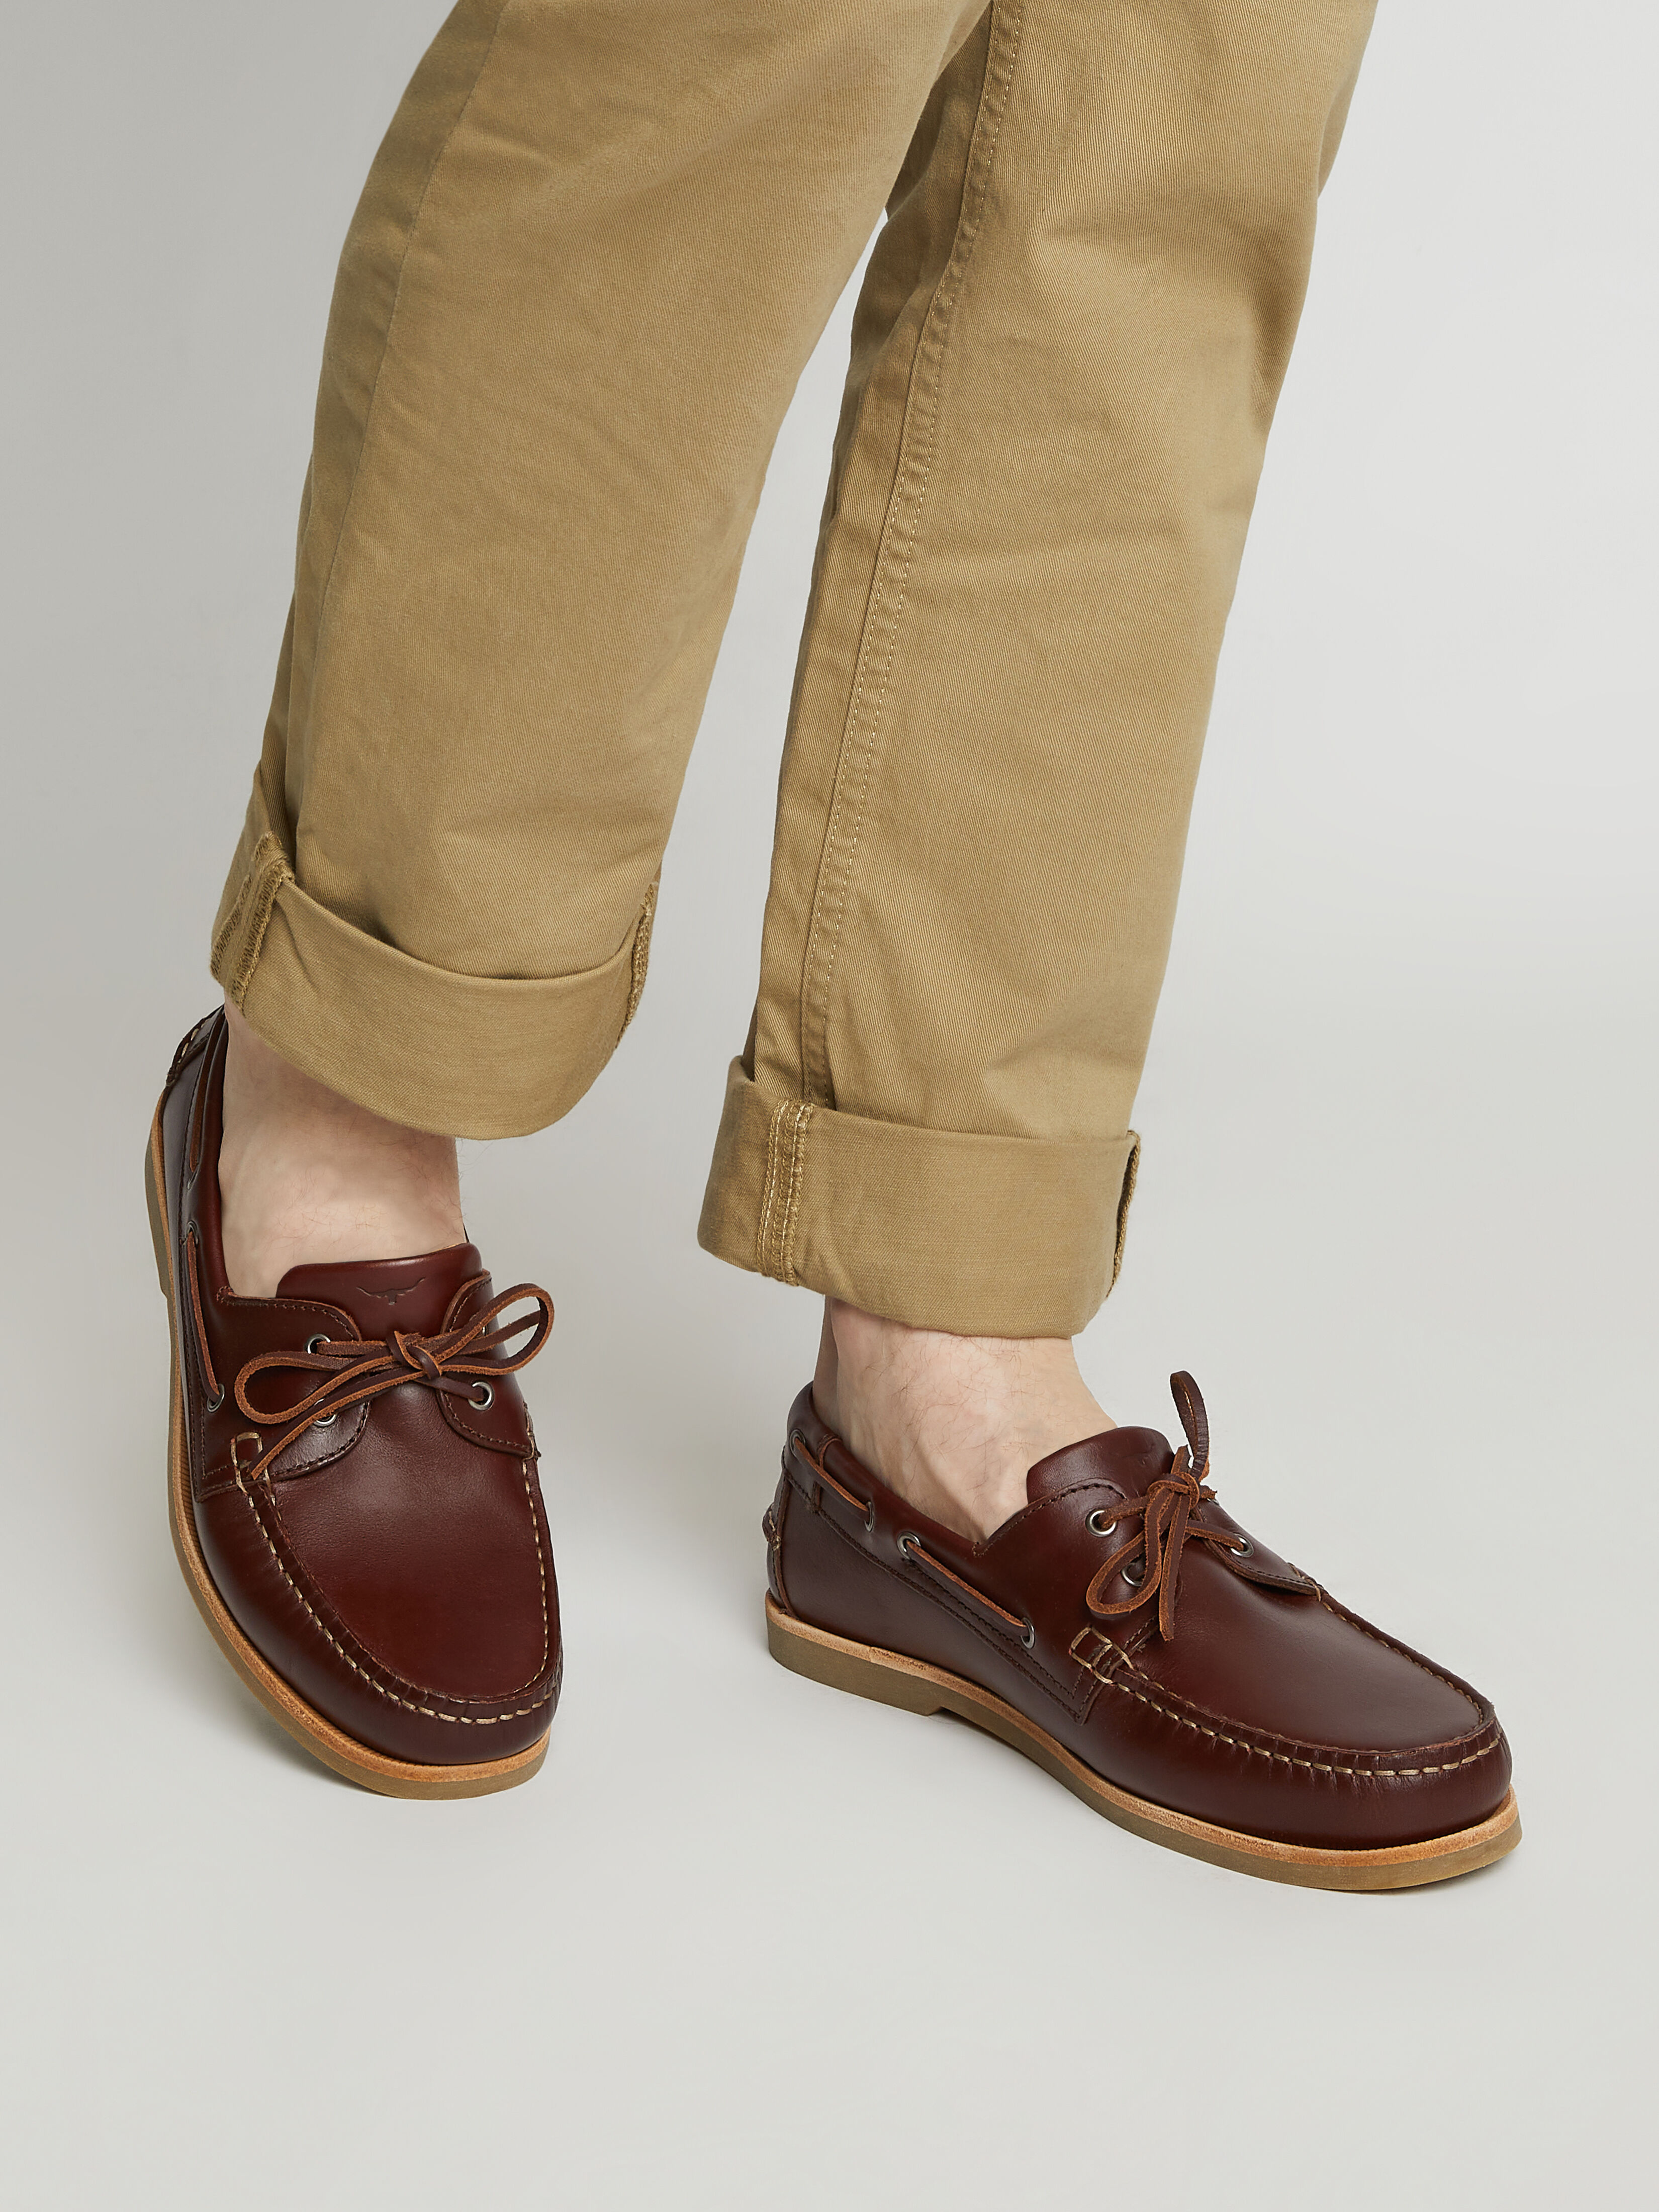 rm williams boat shoes